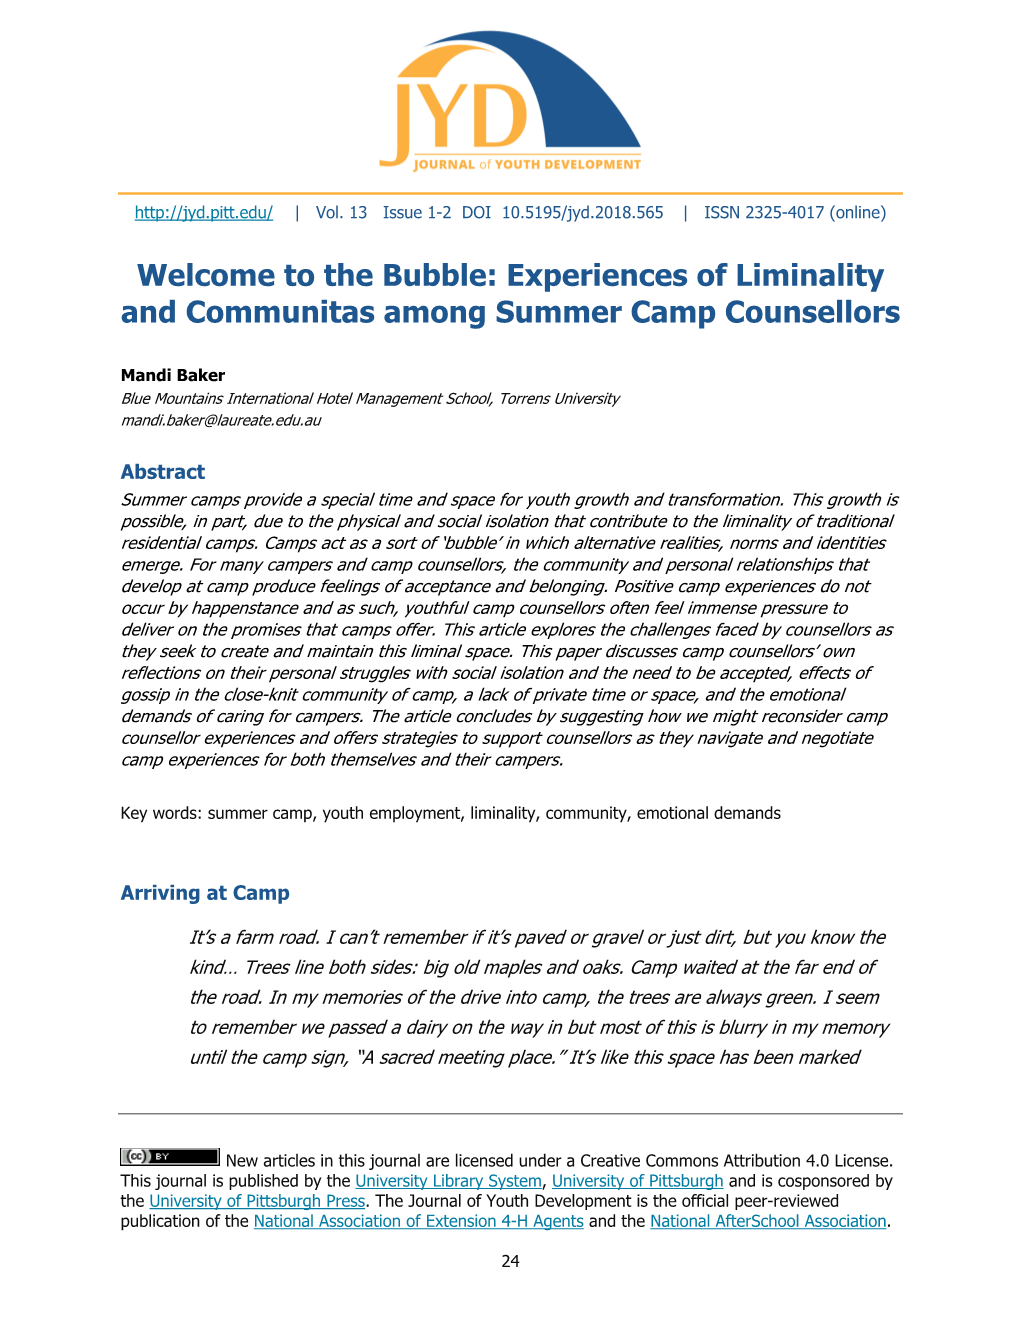 The Bubble: Experiences of Liminality and Communitas Among Summer Camp Counsellors